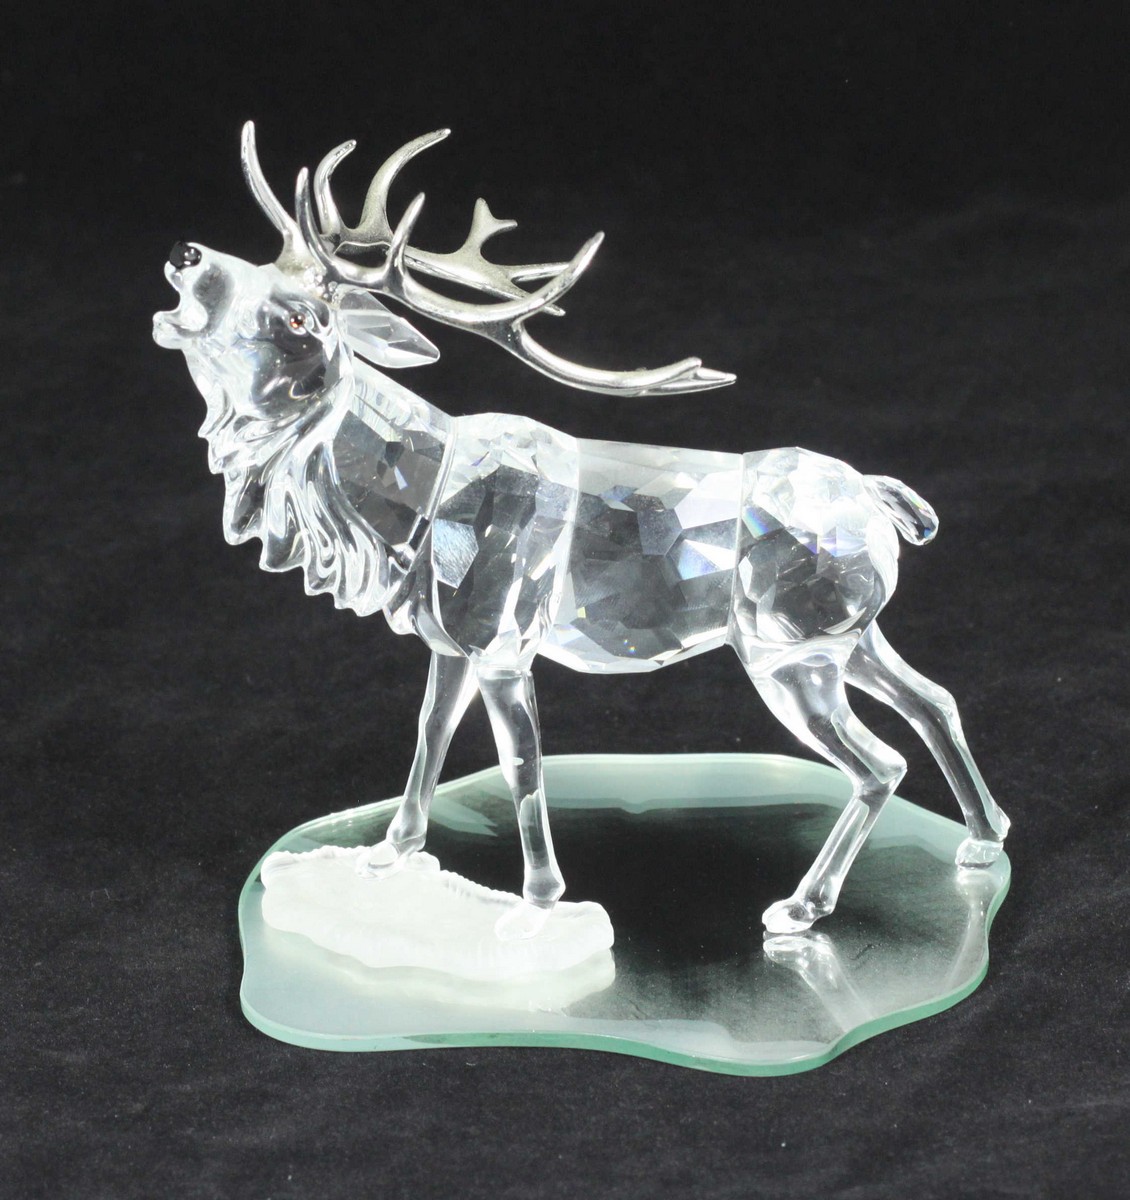 A Swarovski crystal model of a stag with silvered antlers, No. 291431, approx. 13cm high - Image 2 of 2